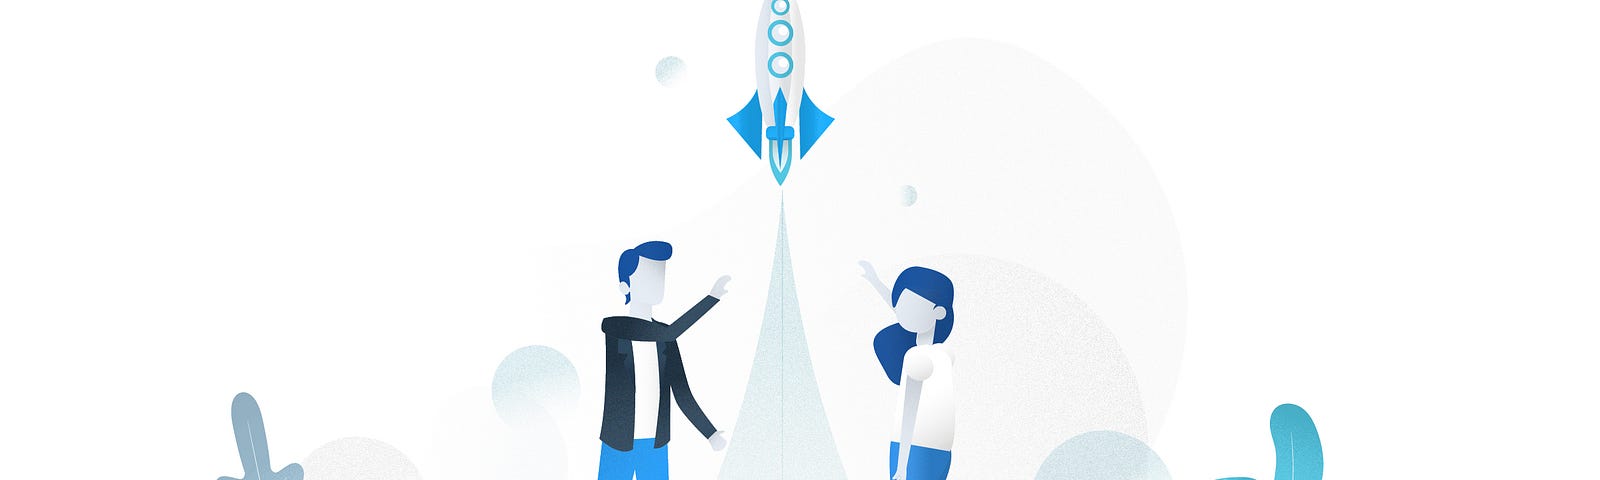 Illustration of a man and a woman launching a rocket